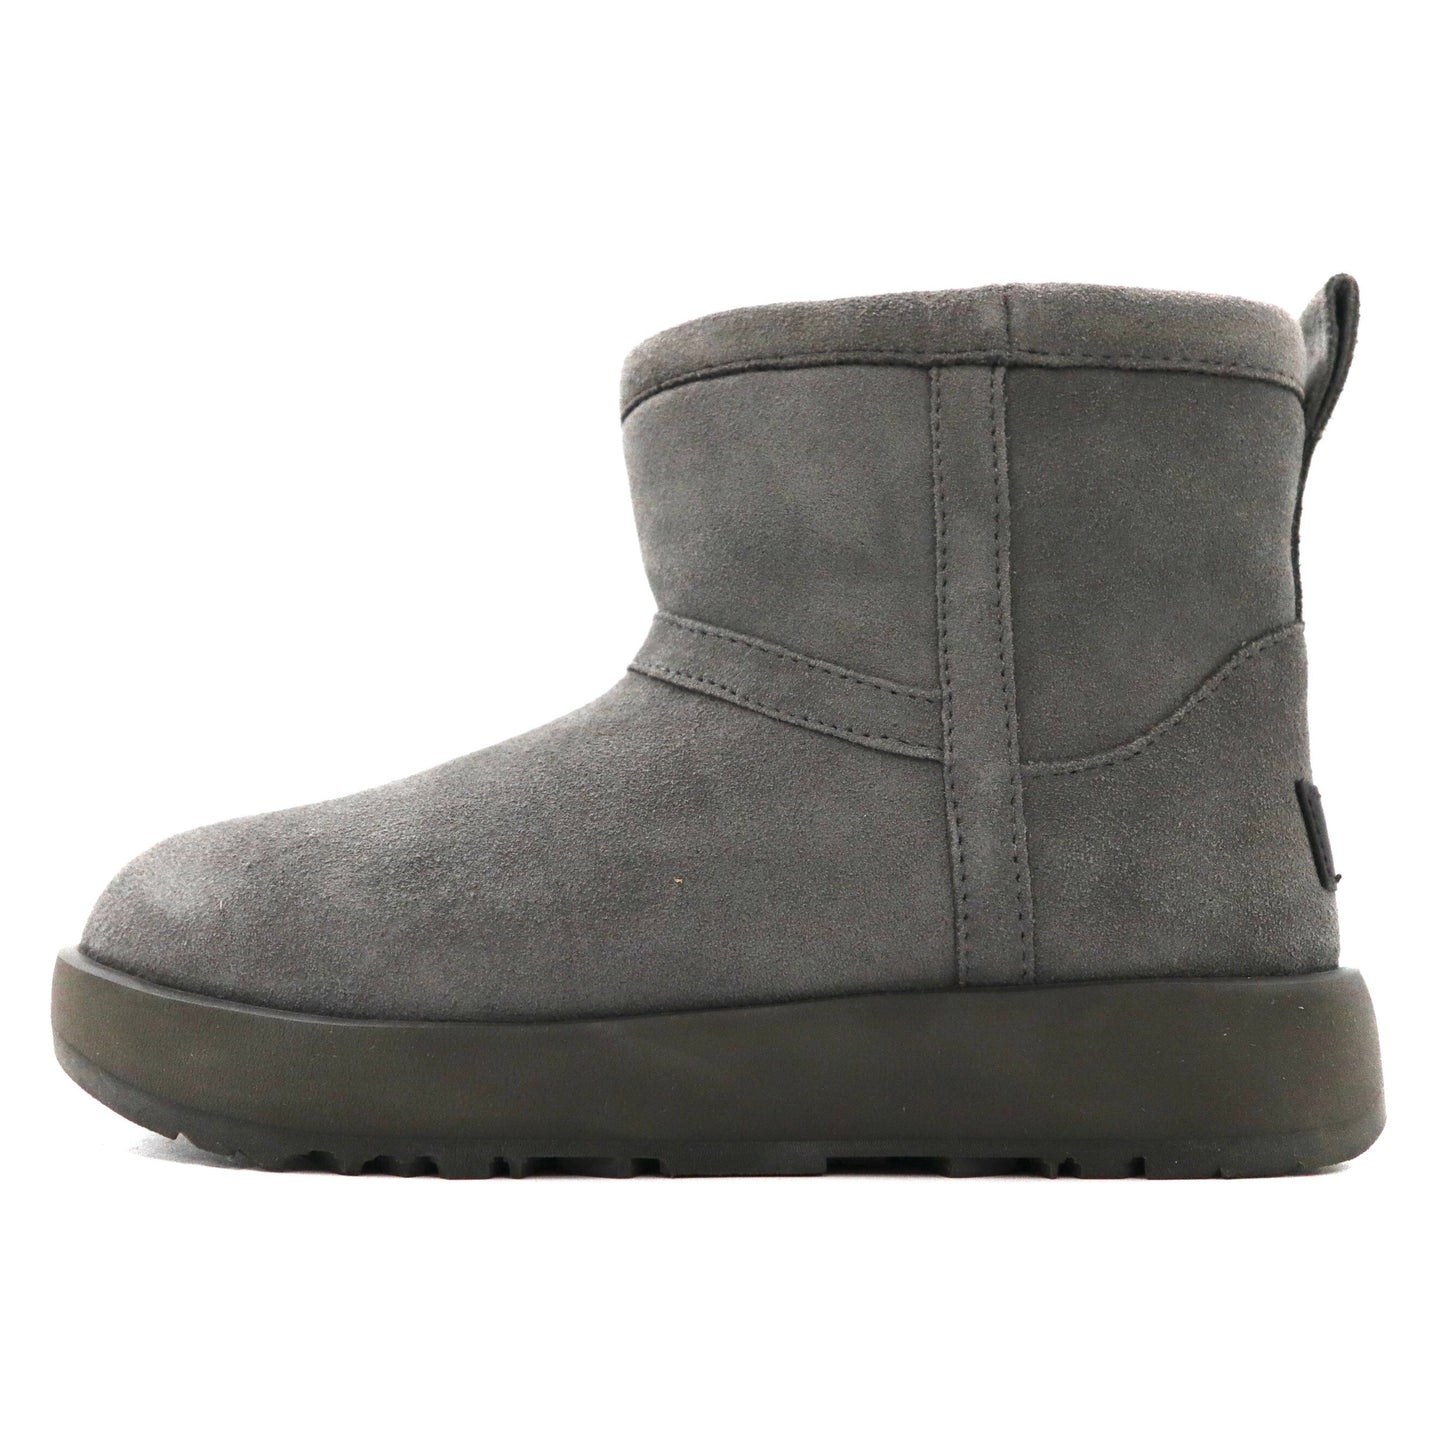 UGG Short Mouton Boots US5 Gray Sheep Leather VIBRAM Sole